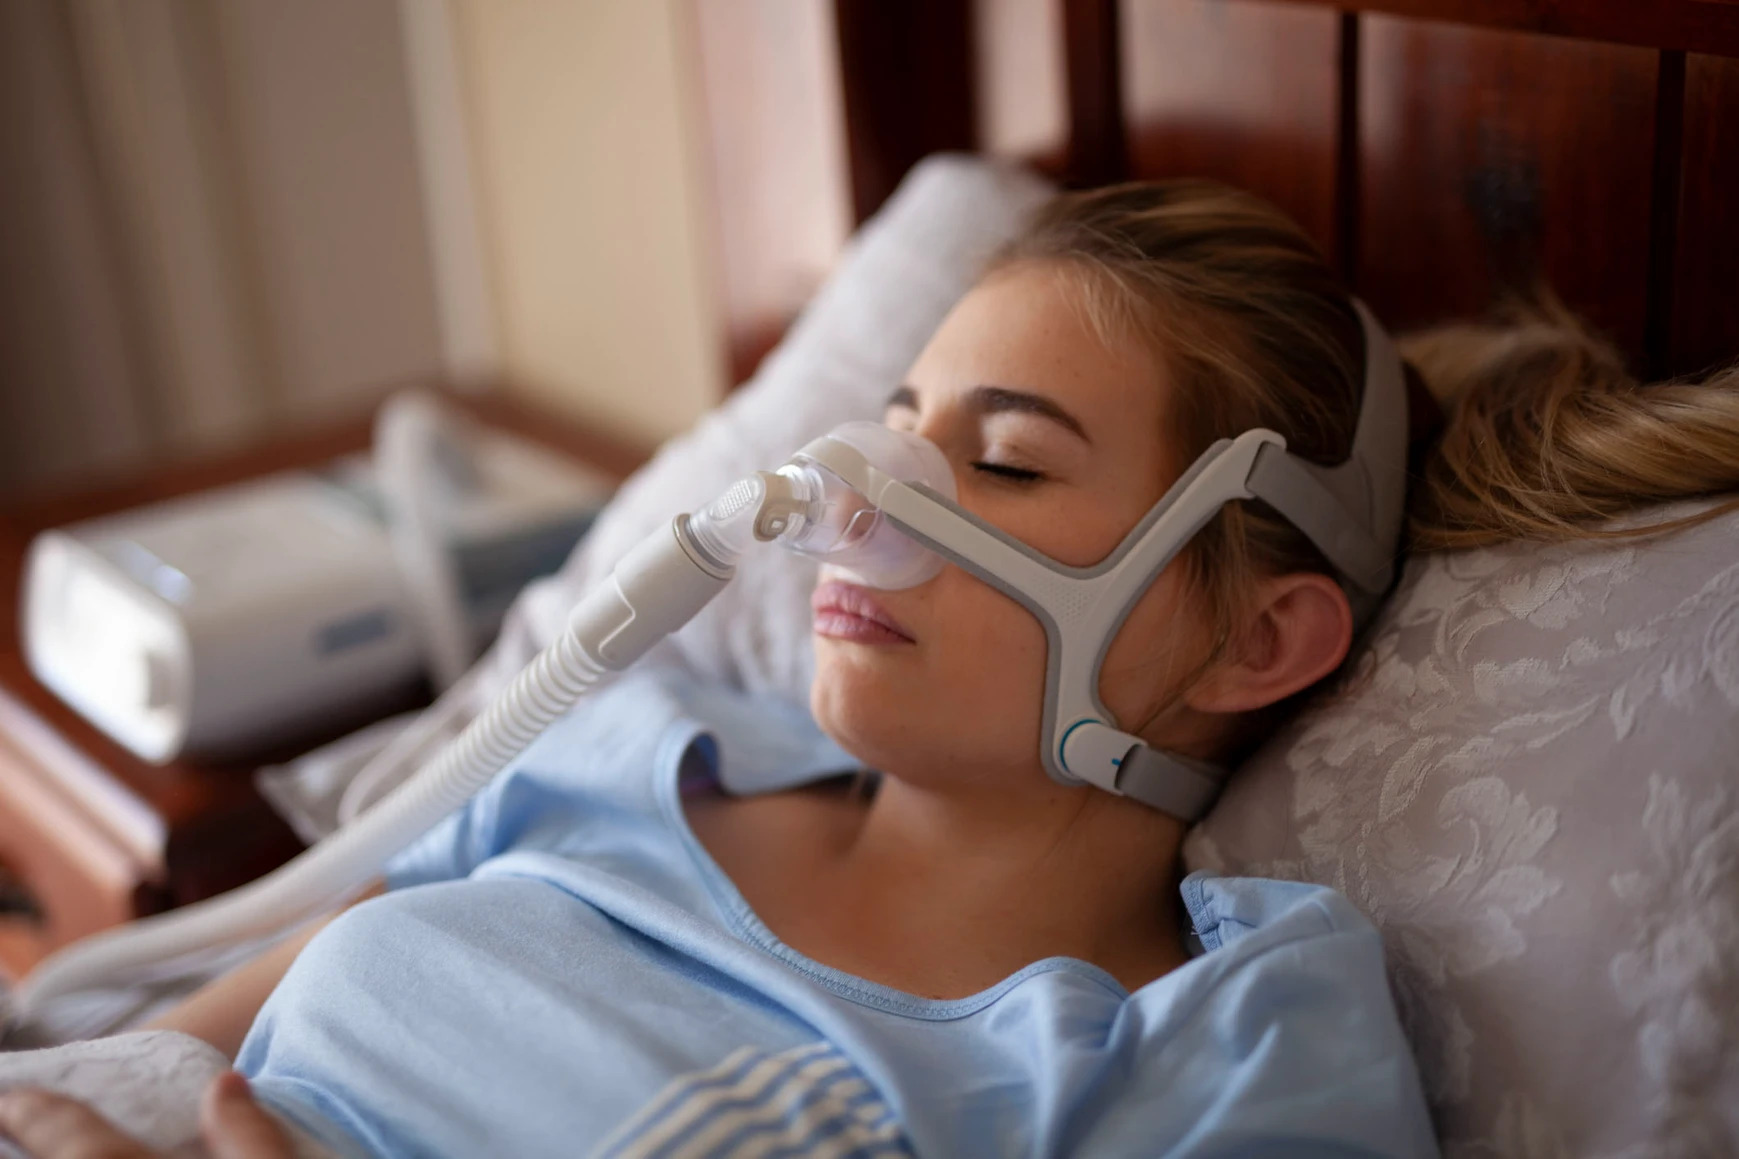 Snoring or stuffy nose while sleeping at night! Are there any chances of sleep apnea?